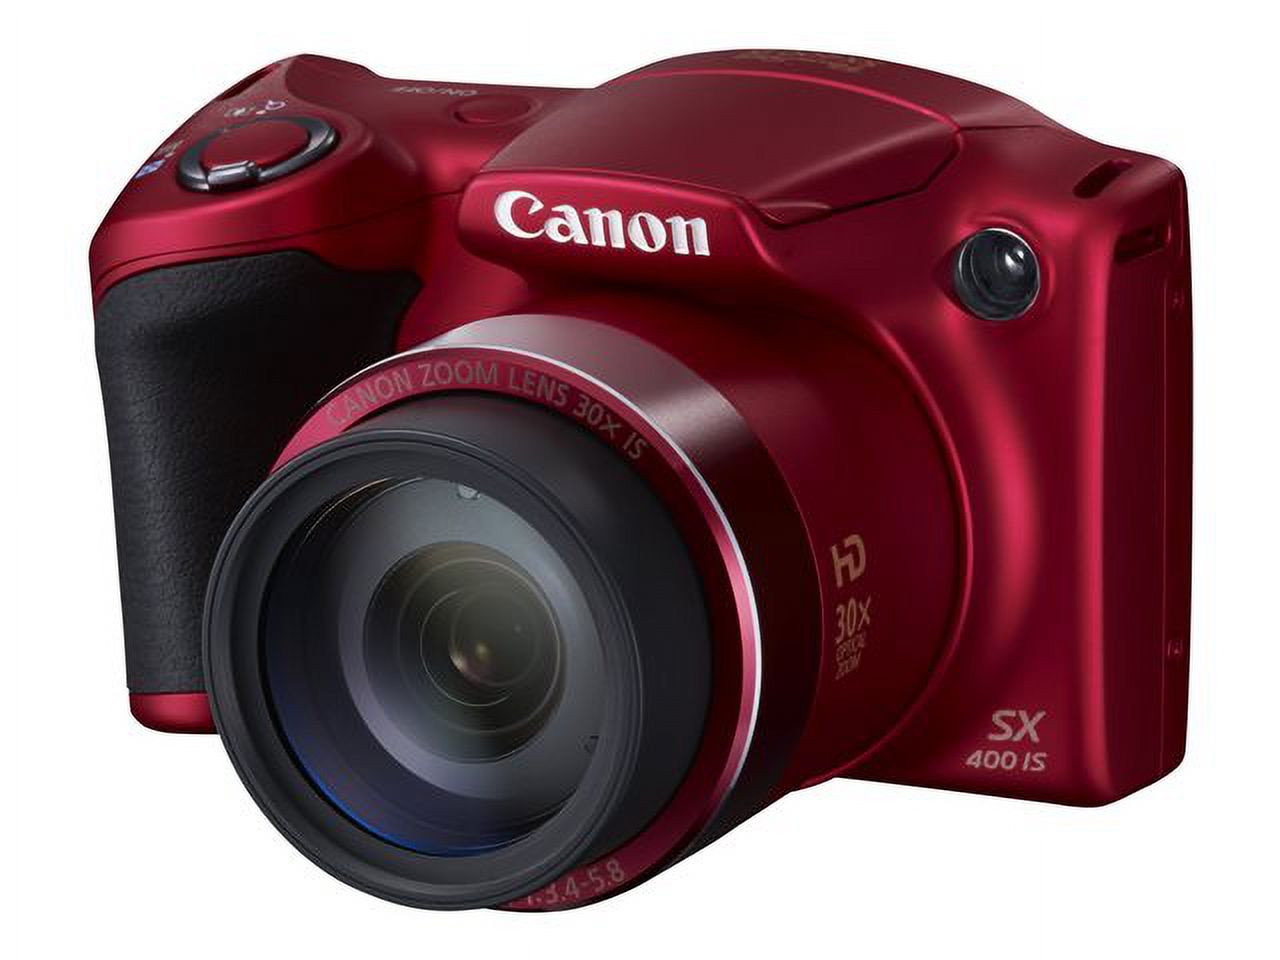 Canon PowerShot SX400 IS - Digital camera - High Definition - compact - 16.0 MP - 30 x optical zoom - red - image 25 of 72